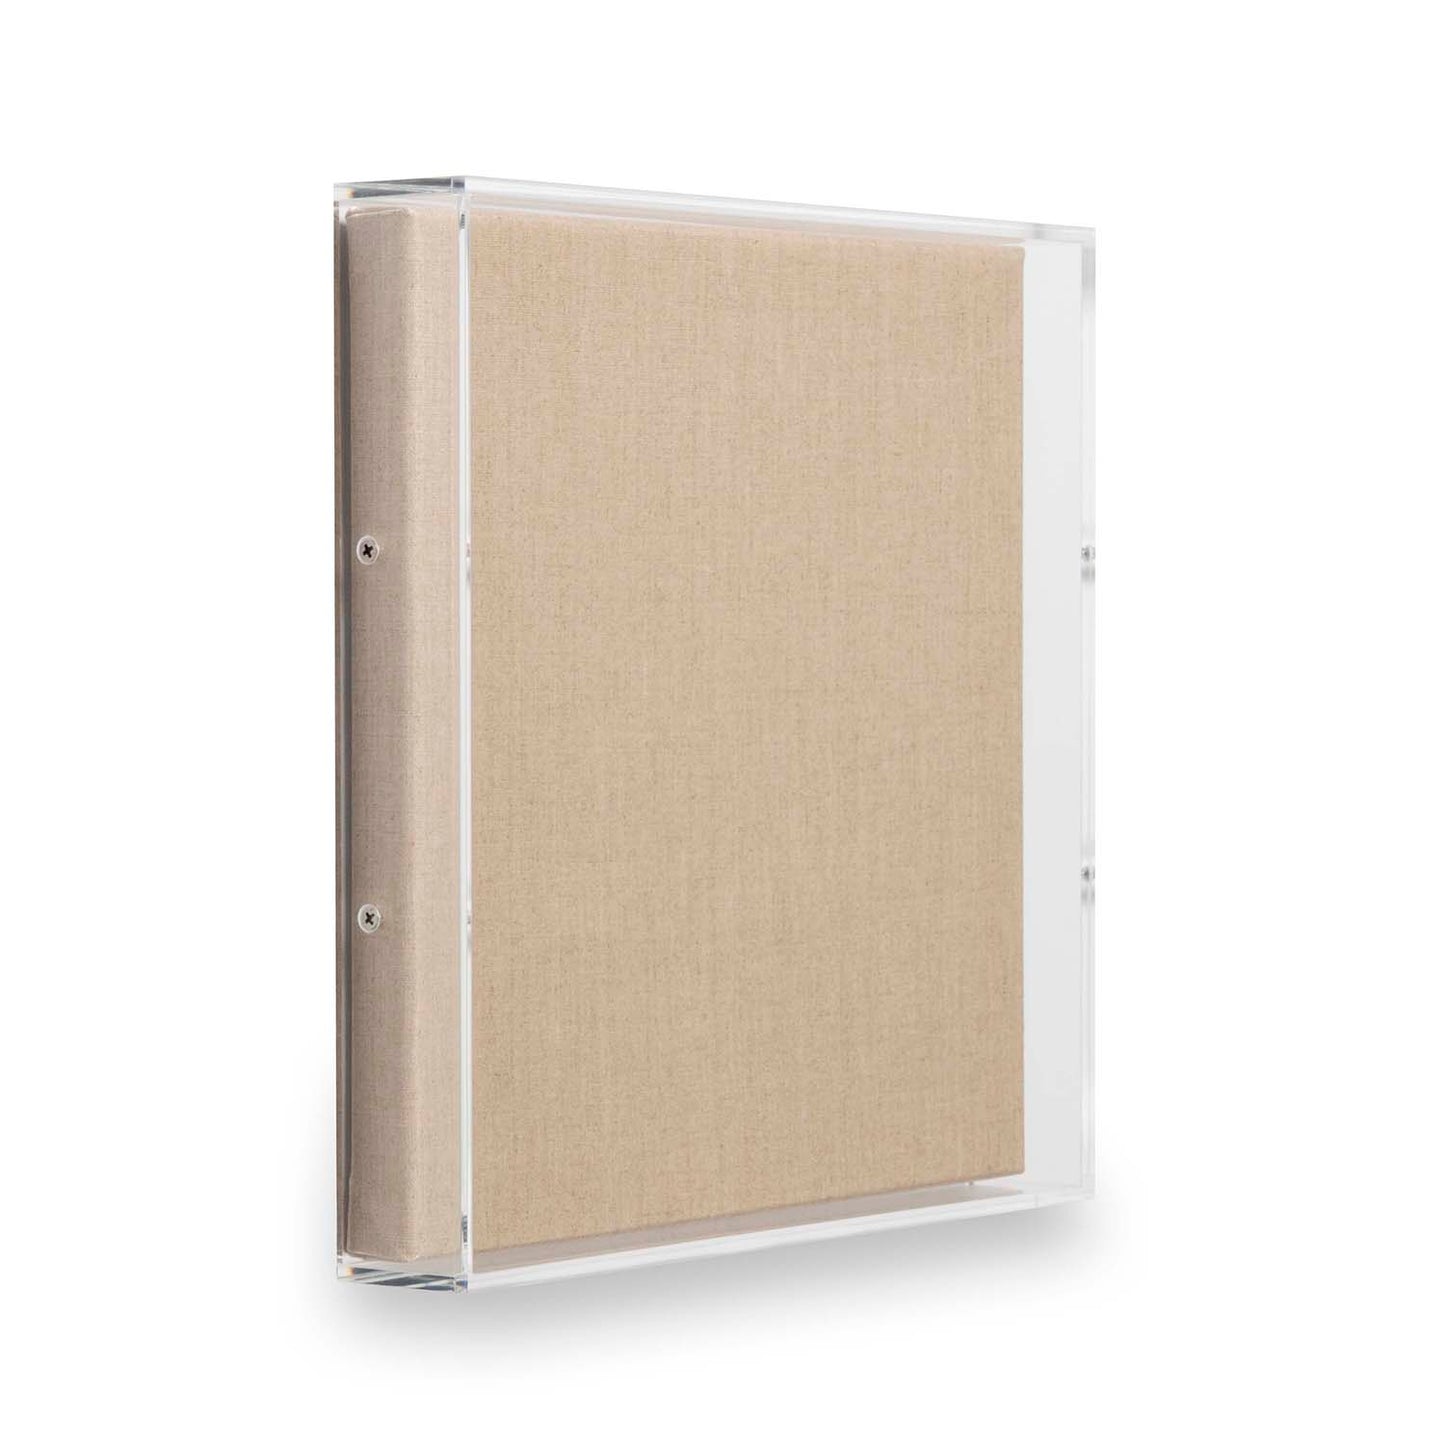 Case Pack of Shadowbox with Canvas - 2" Depth